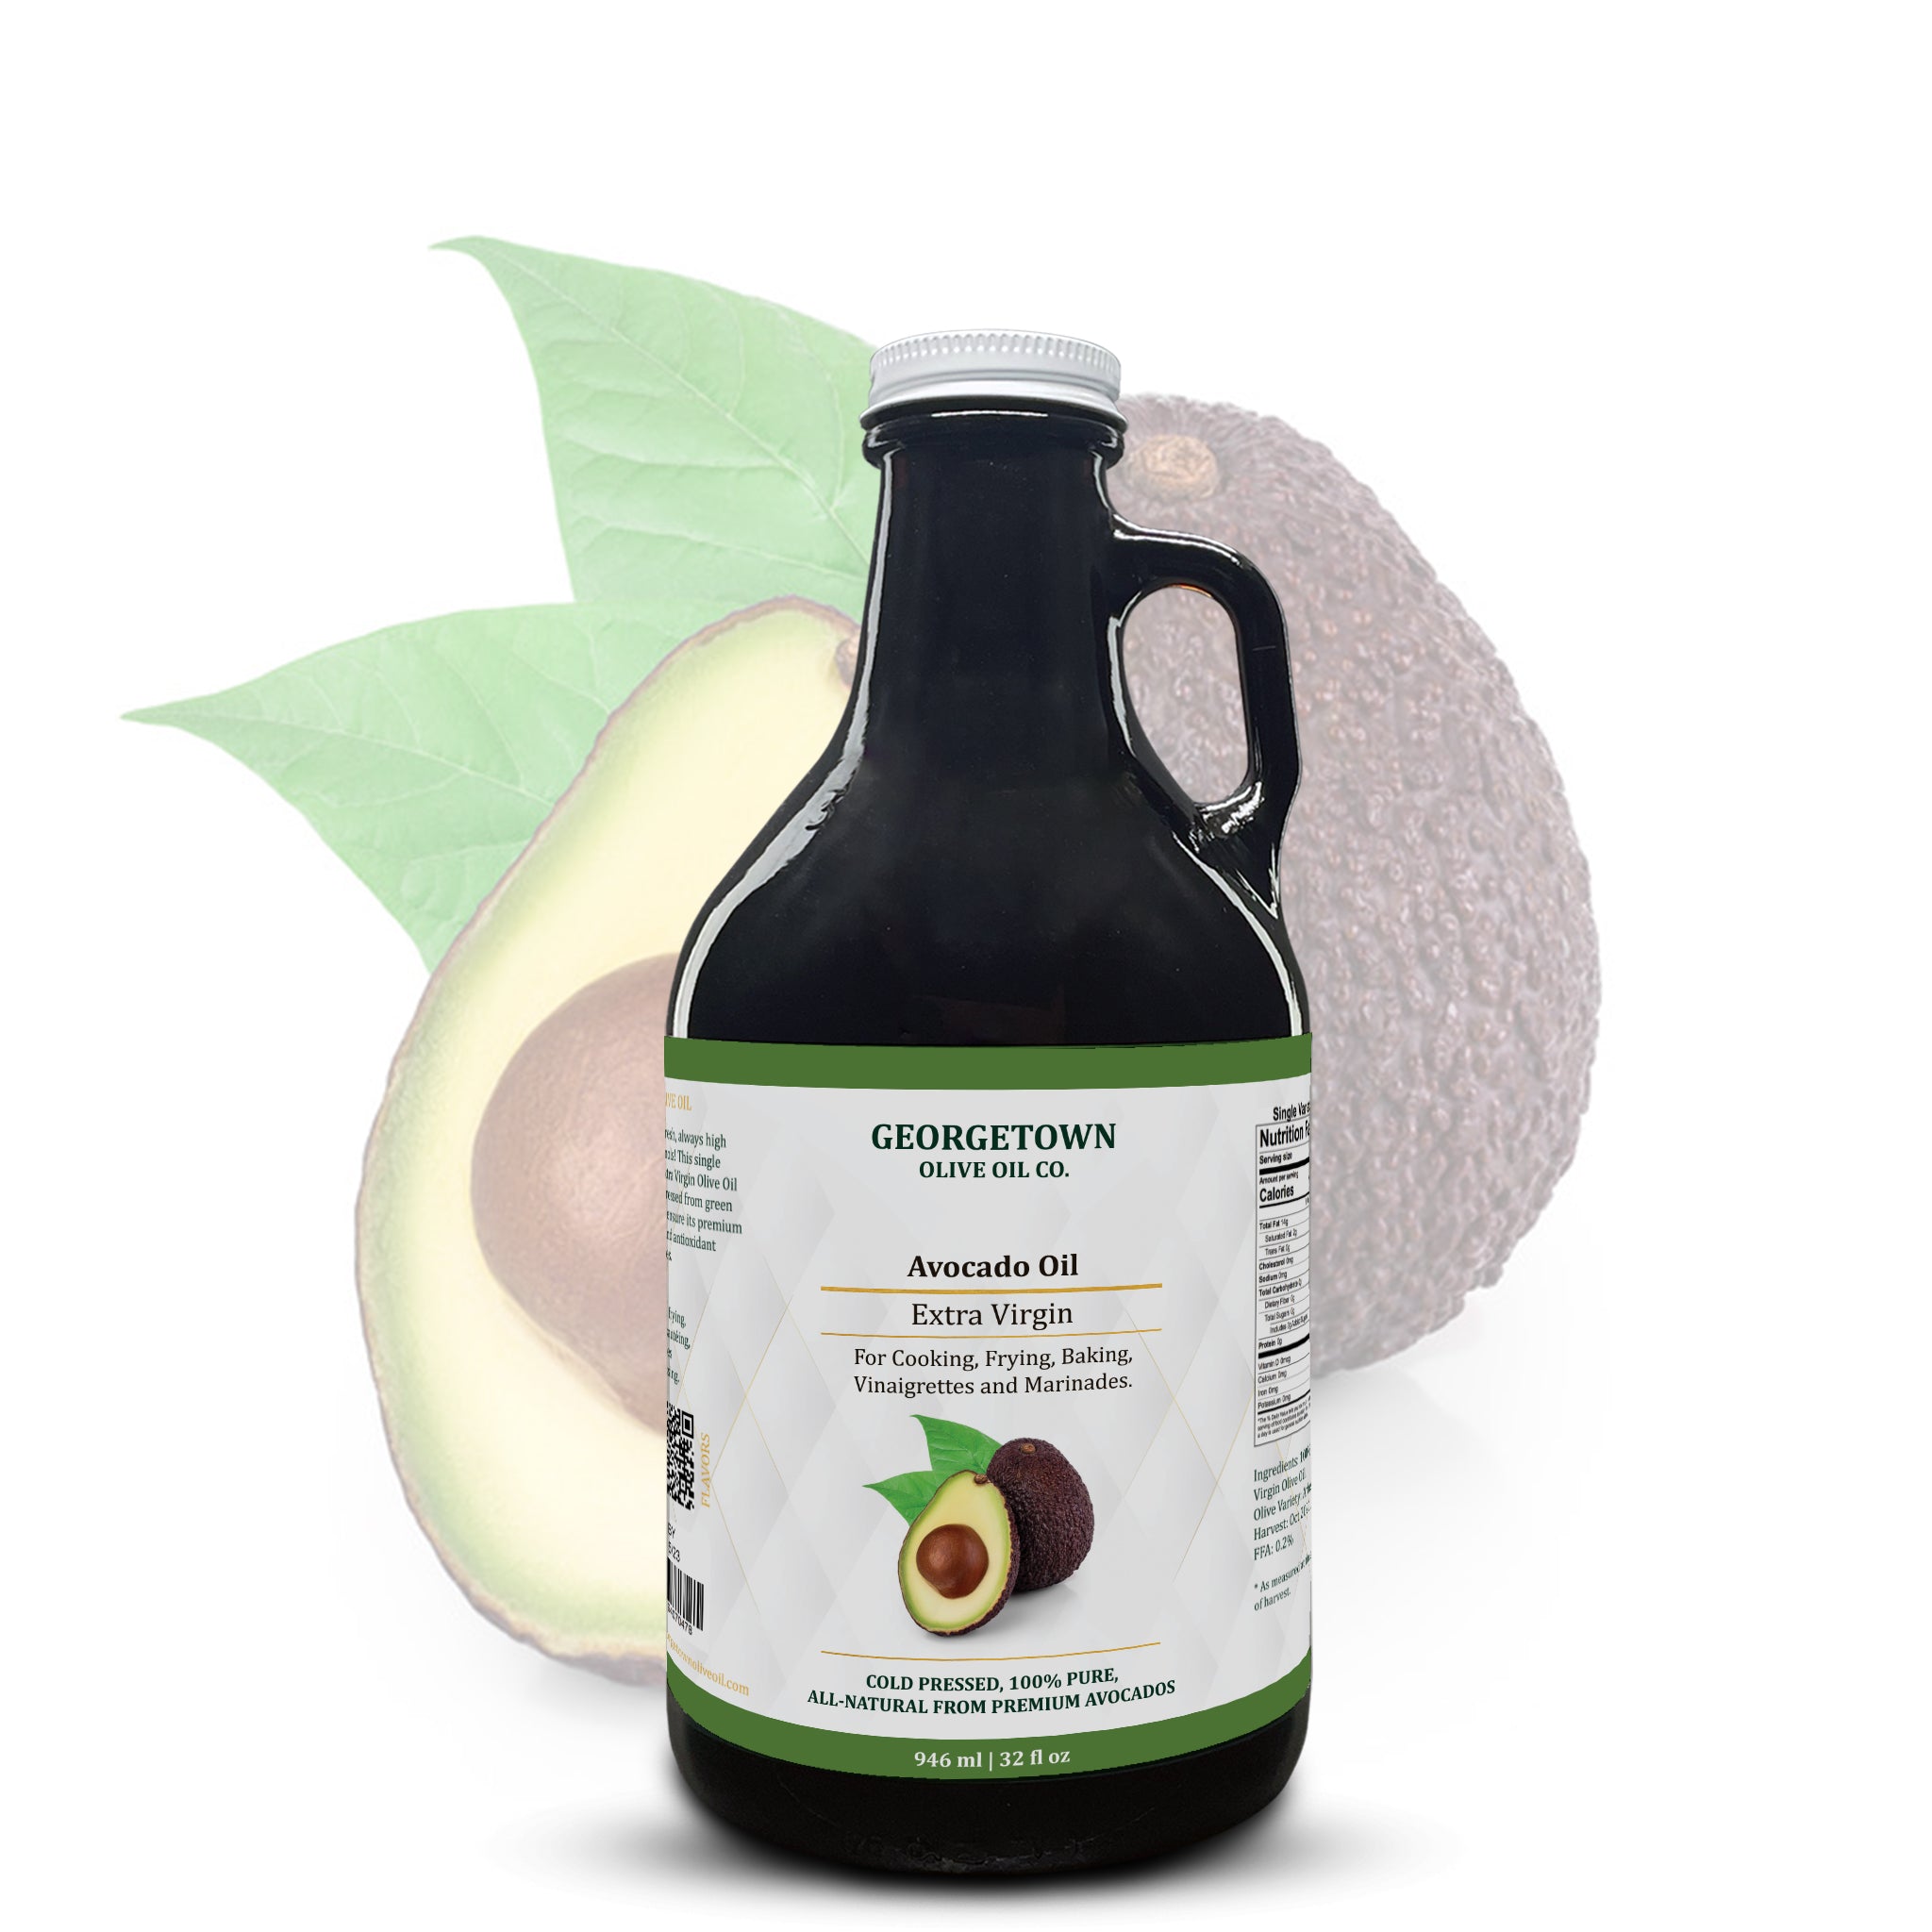 Avocado Oil - Extra Virgin, 100% Pure for Cooking